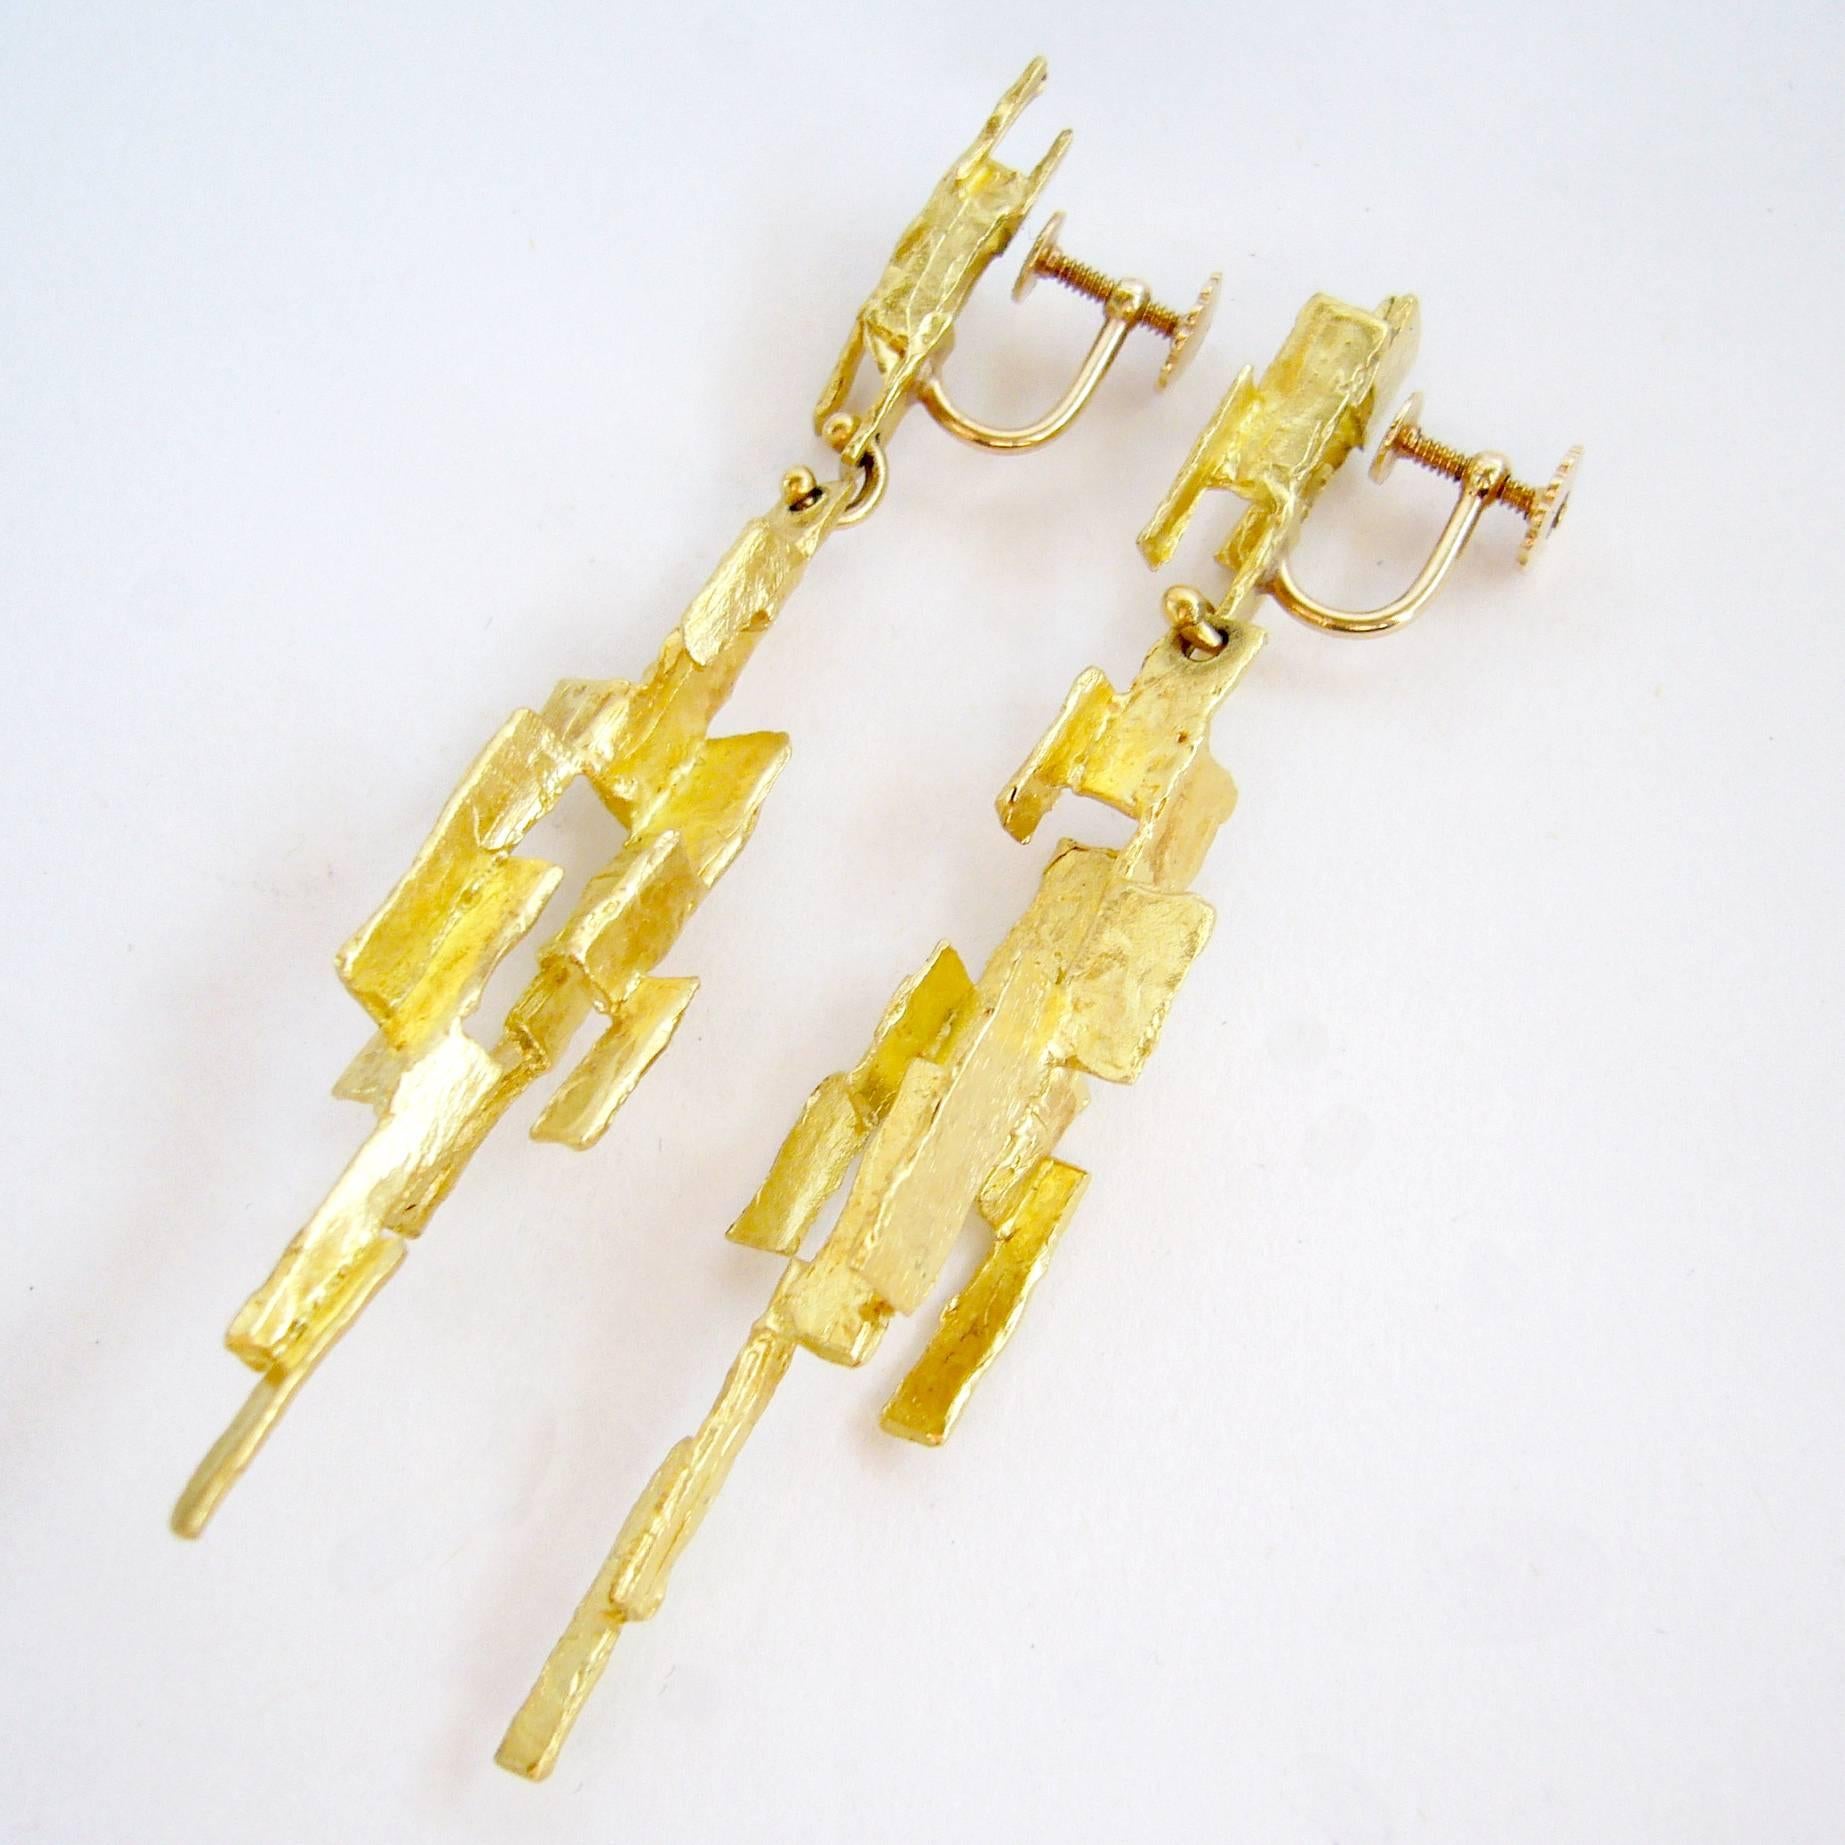 18k gold abstract modernist earrings designed and created by Ed Wiener of New York City, New York.  Earrings are of the screwback variety and can easily be converted for pierced ears.  They measure 3.5